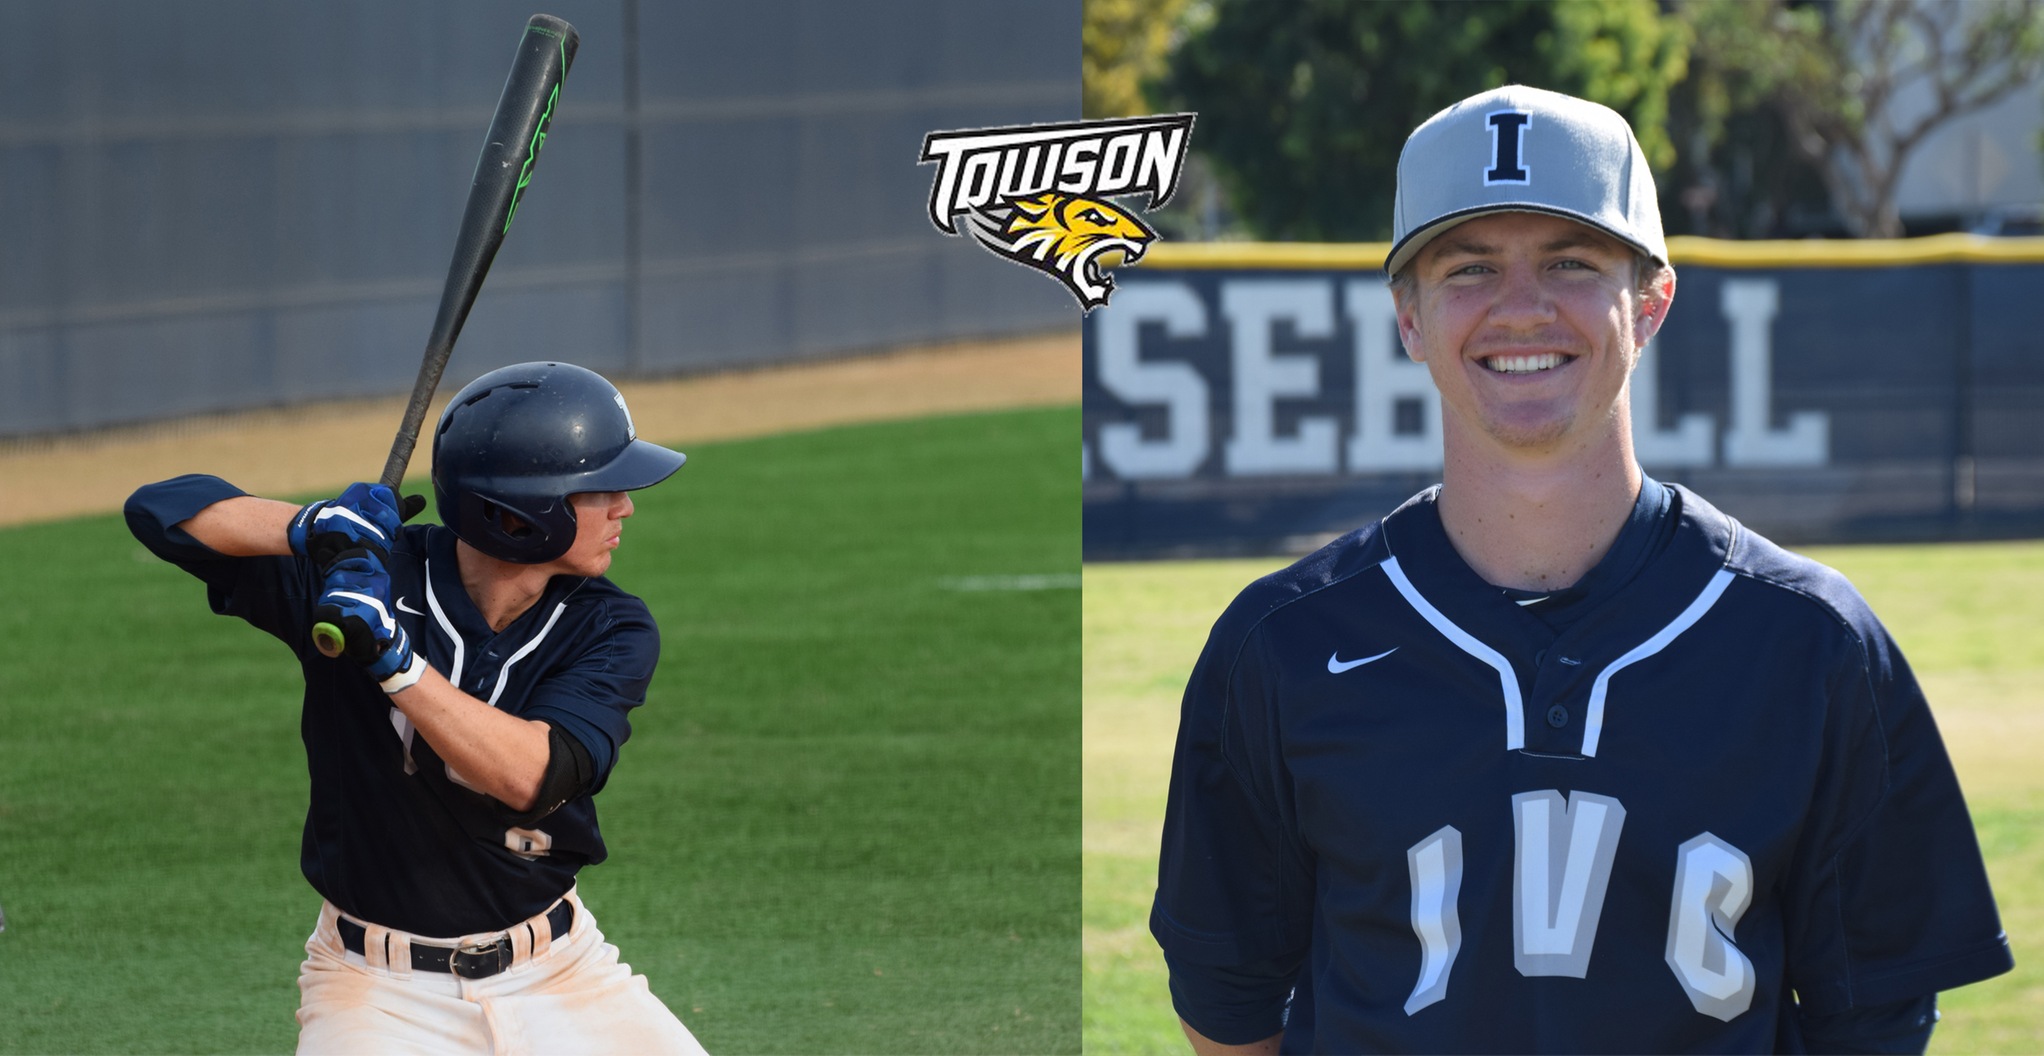 Sophomore infielder Colin Conroy headed to Towson State